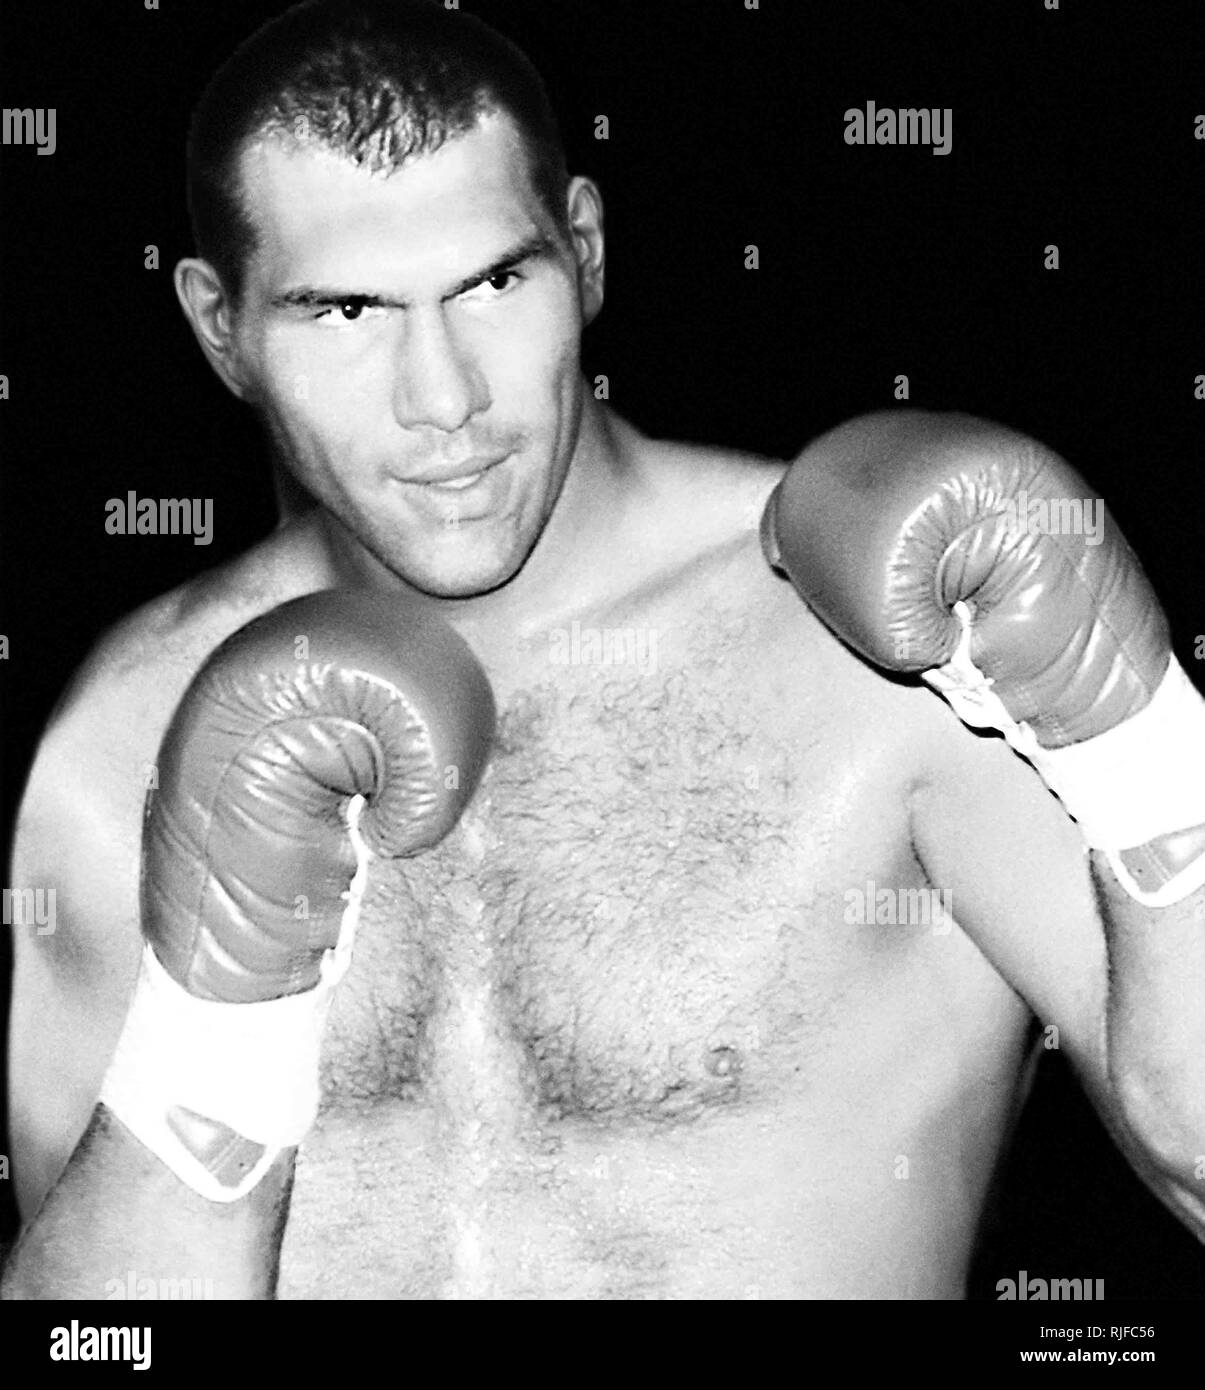 boxe-1997-russian-heavyweight-nikolaj-valuev-in-the-beginning-of-his-career-picture-taken-with-a-camera-nikon-fm2-new-photograph-with-a-scanner-RJFC56.jpg